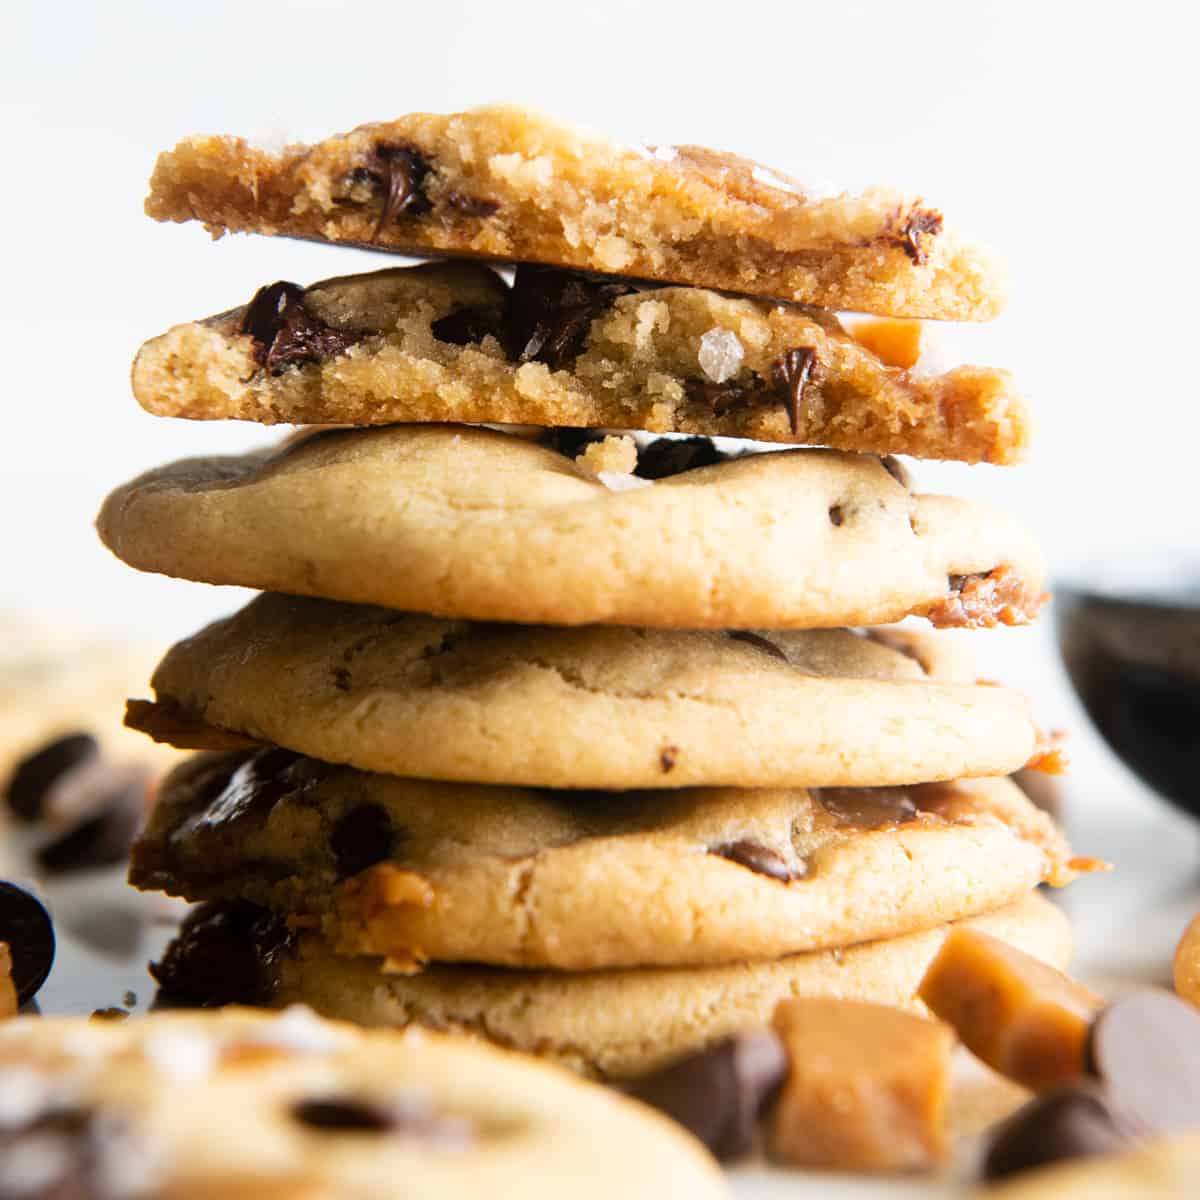 a stack of 5 Chocolate Chip Caramel Cookies, the top one is broken in half so you can see the inside